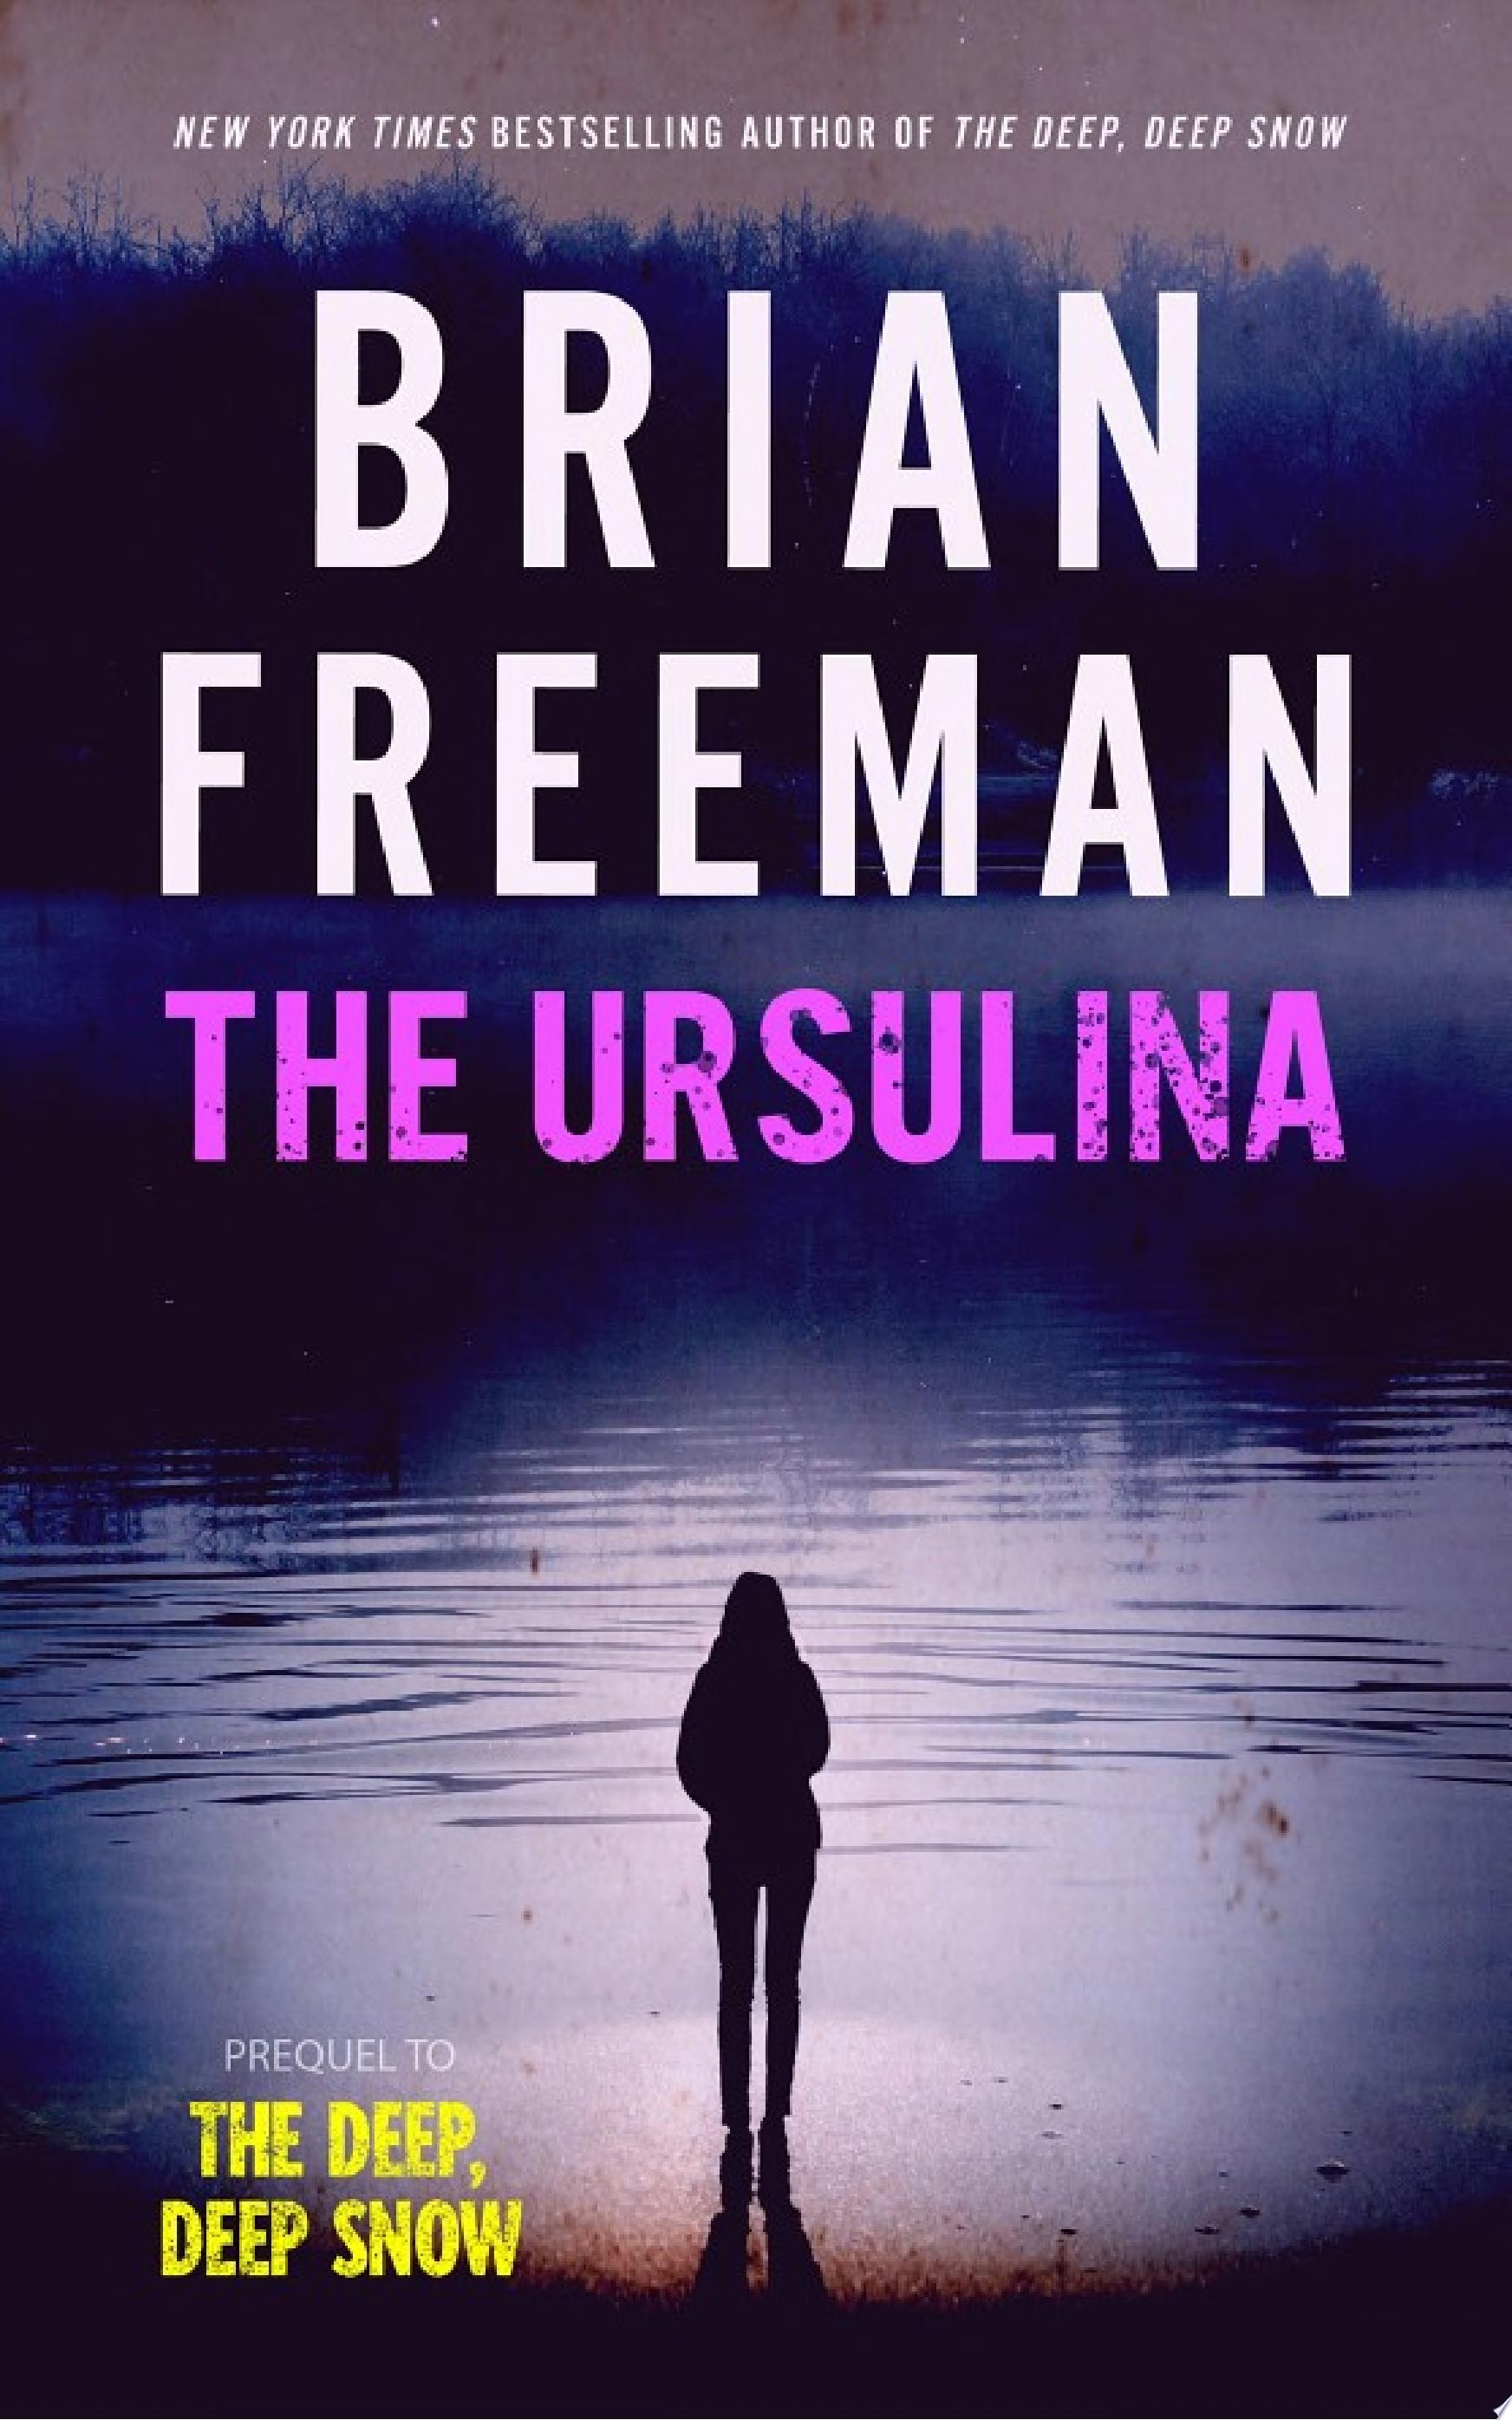 Image for "The Ursulina"